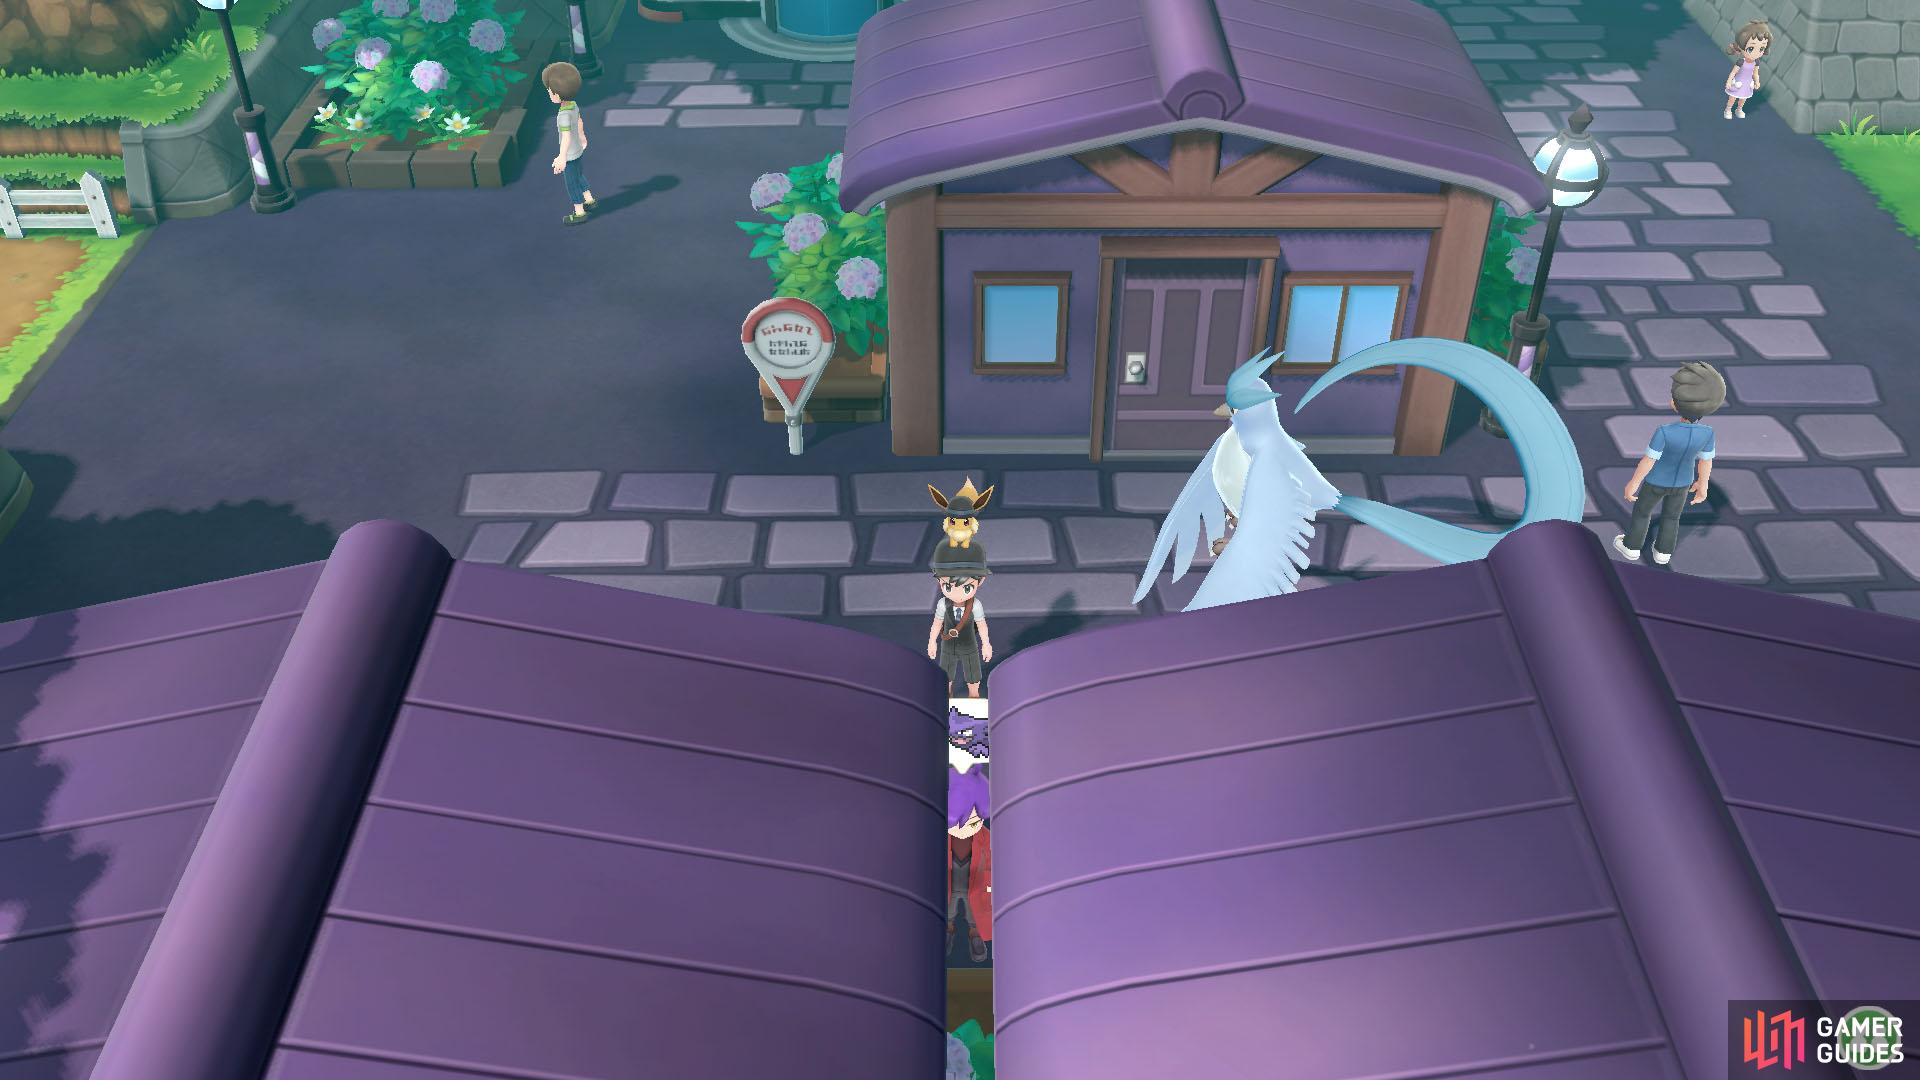 093 Haunter - Lavender Town: Hiding behind two south-western houses. 